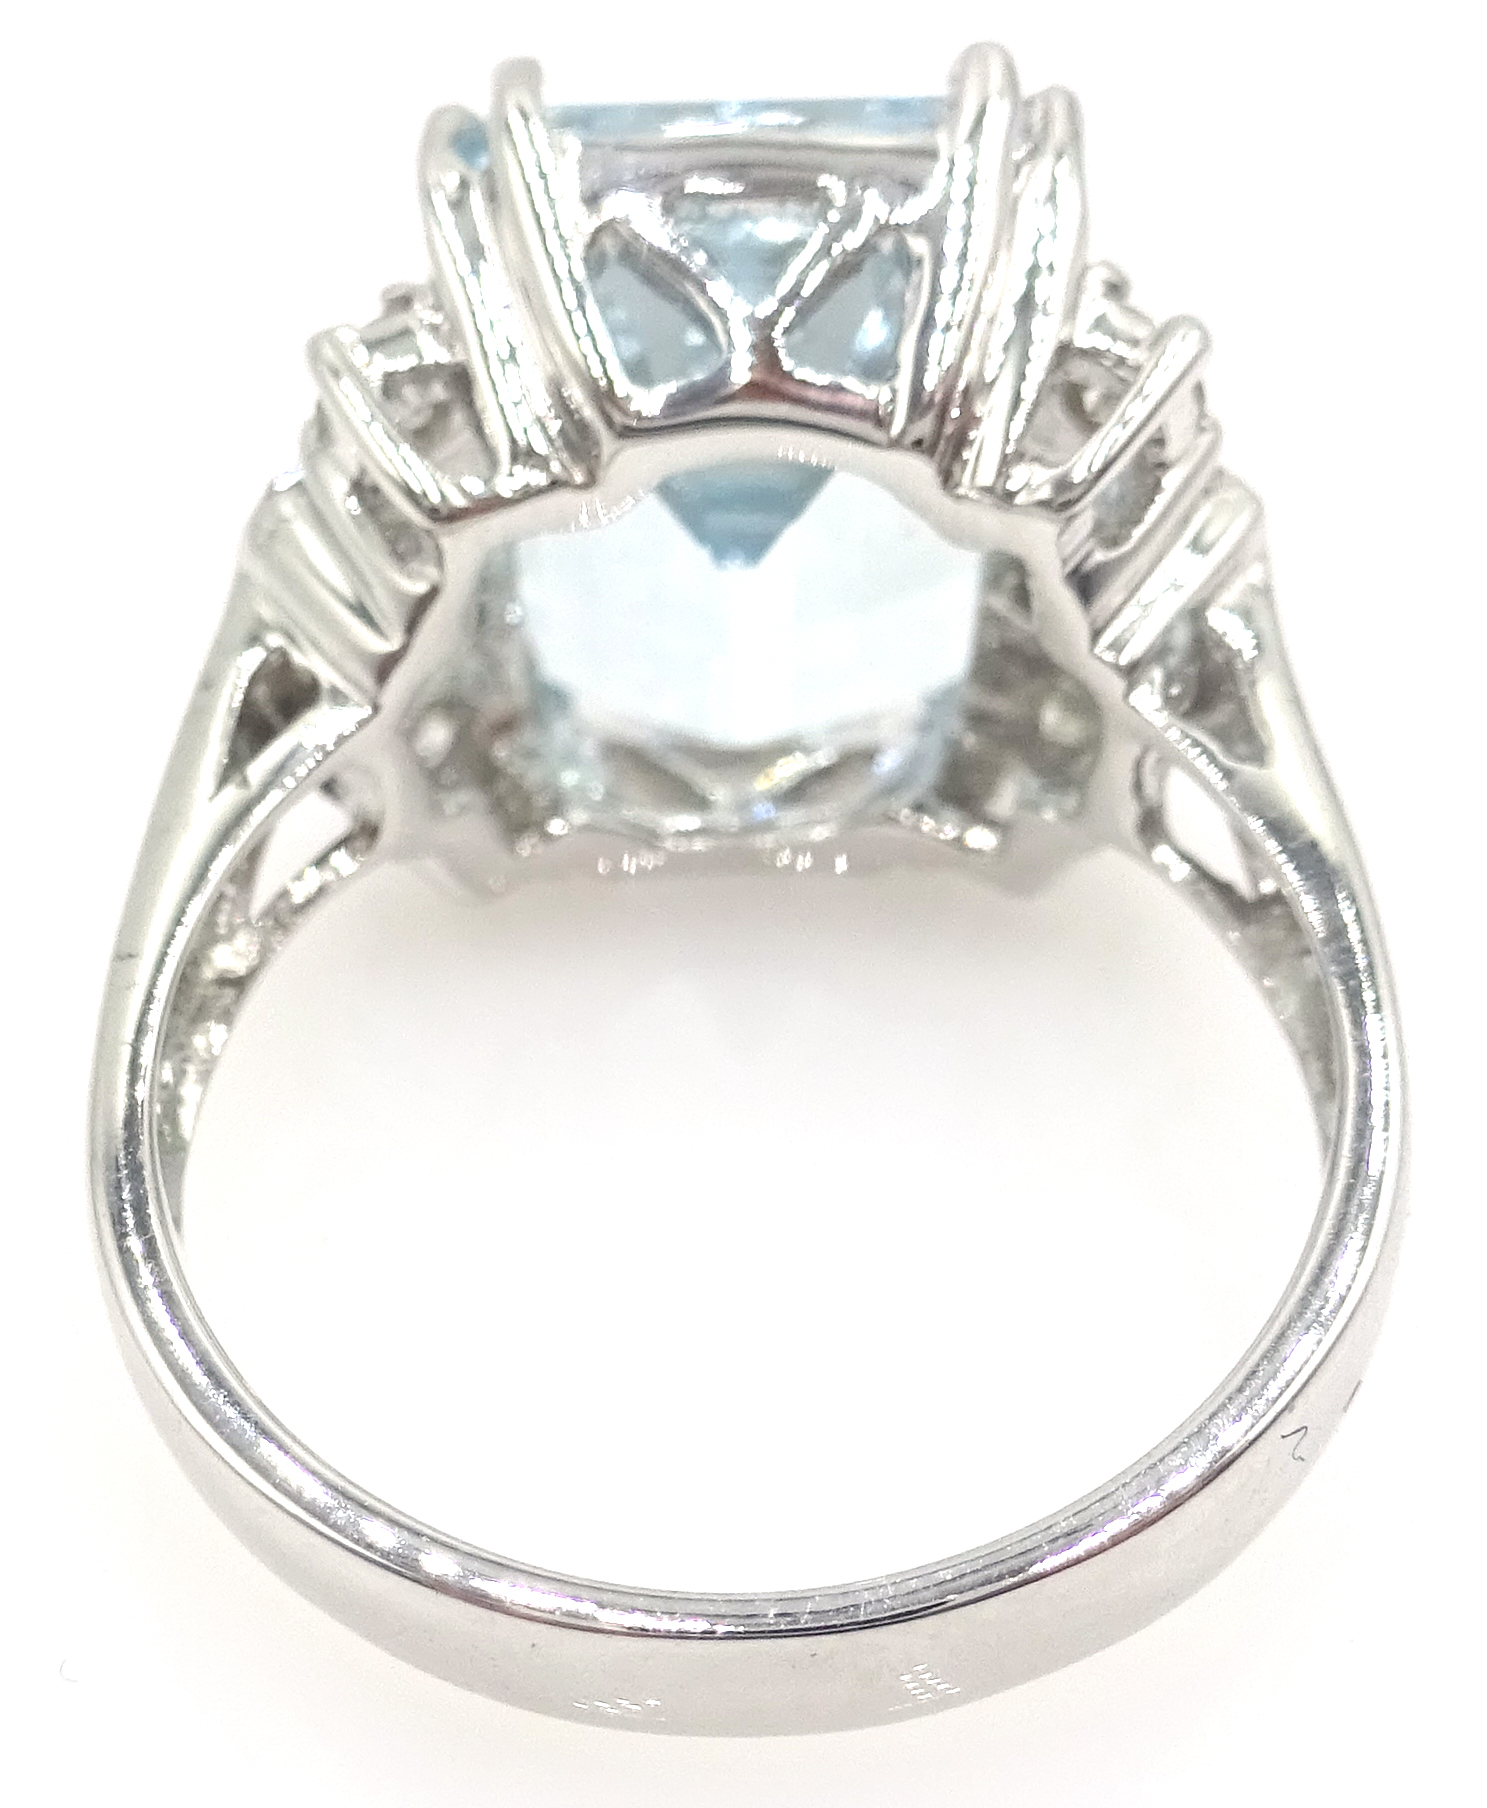 18ct white gold emerald cut aquamarine and diamond ring stamped 750, - Image 4 of 6